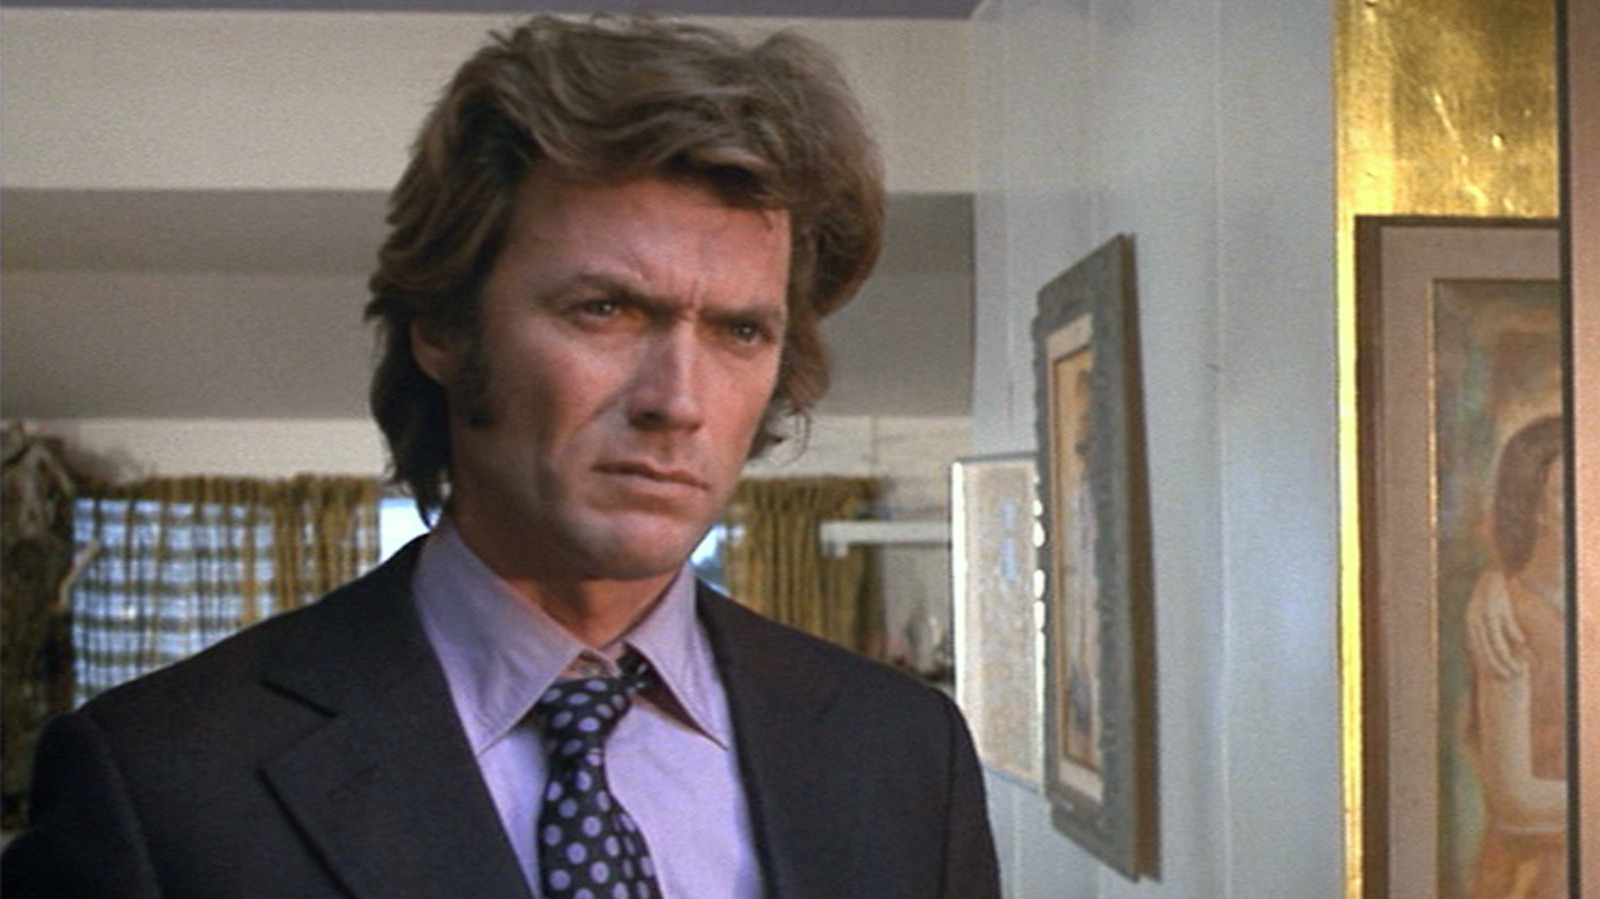 Clint Eastwood borrowed a small but hard-hitting element of psycho to play Misty For Me